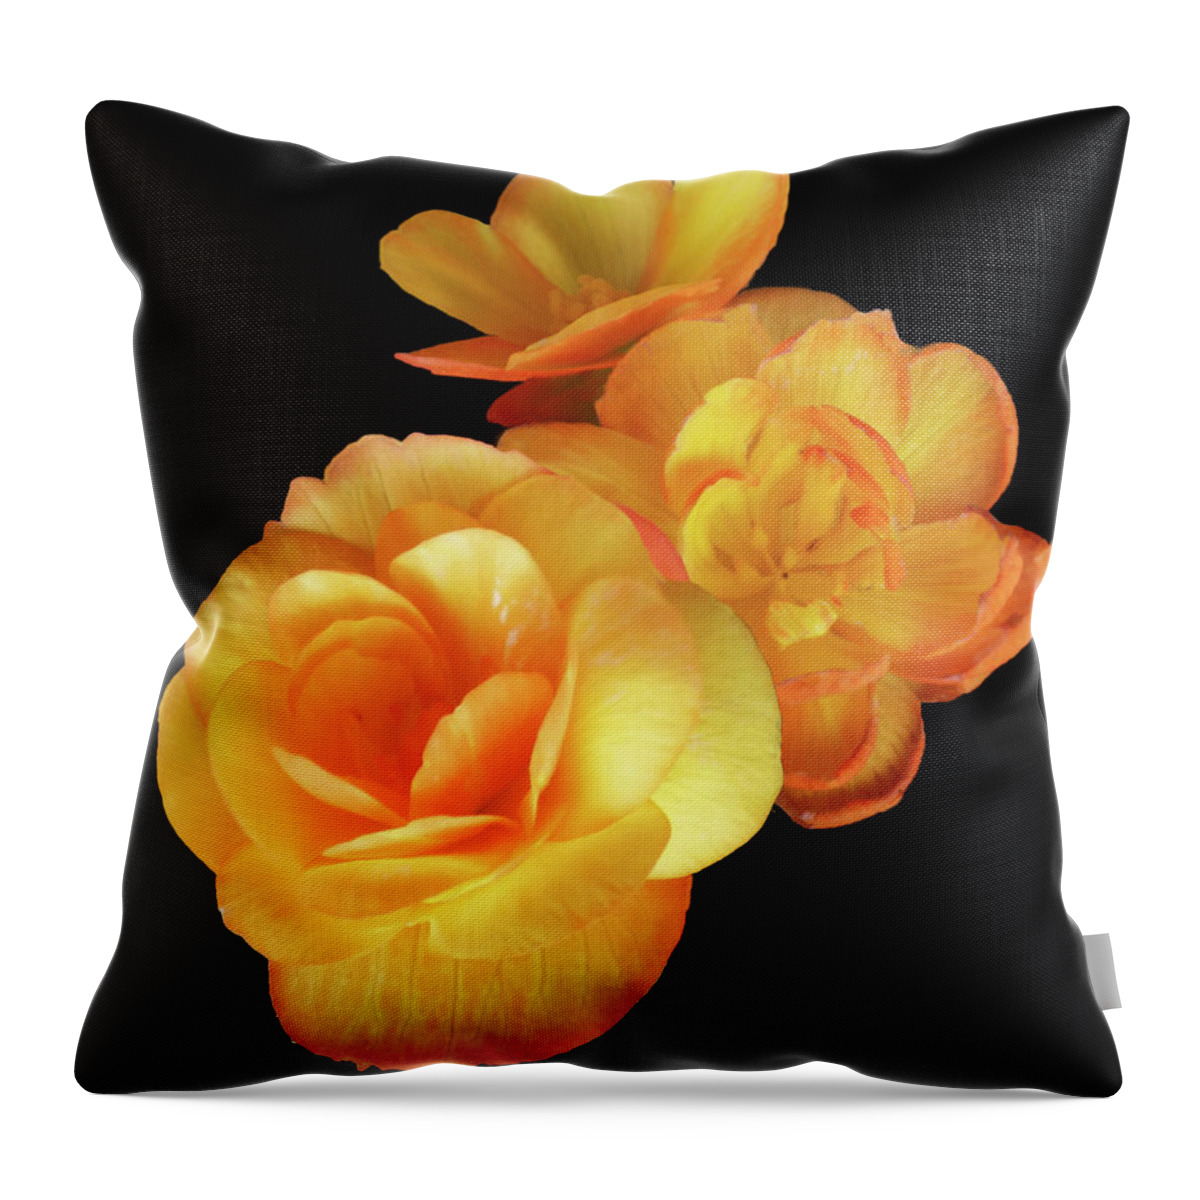 Flowers Throw Pillow featuring the mixed media Blossoms in Yellow and Orange by Sharon Williams Eng